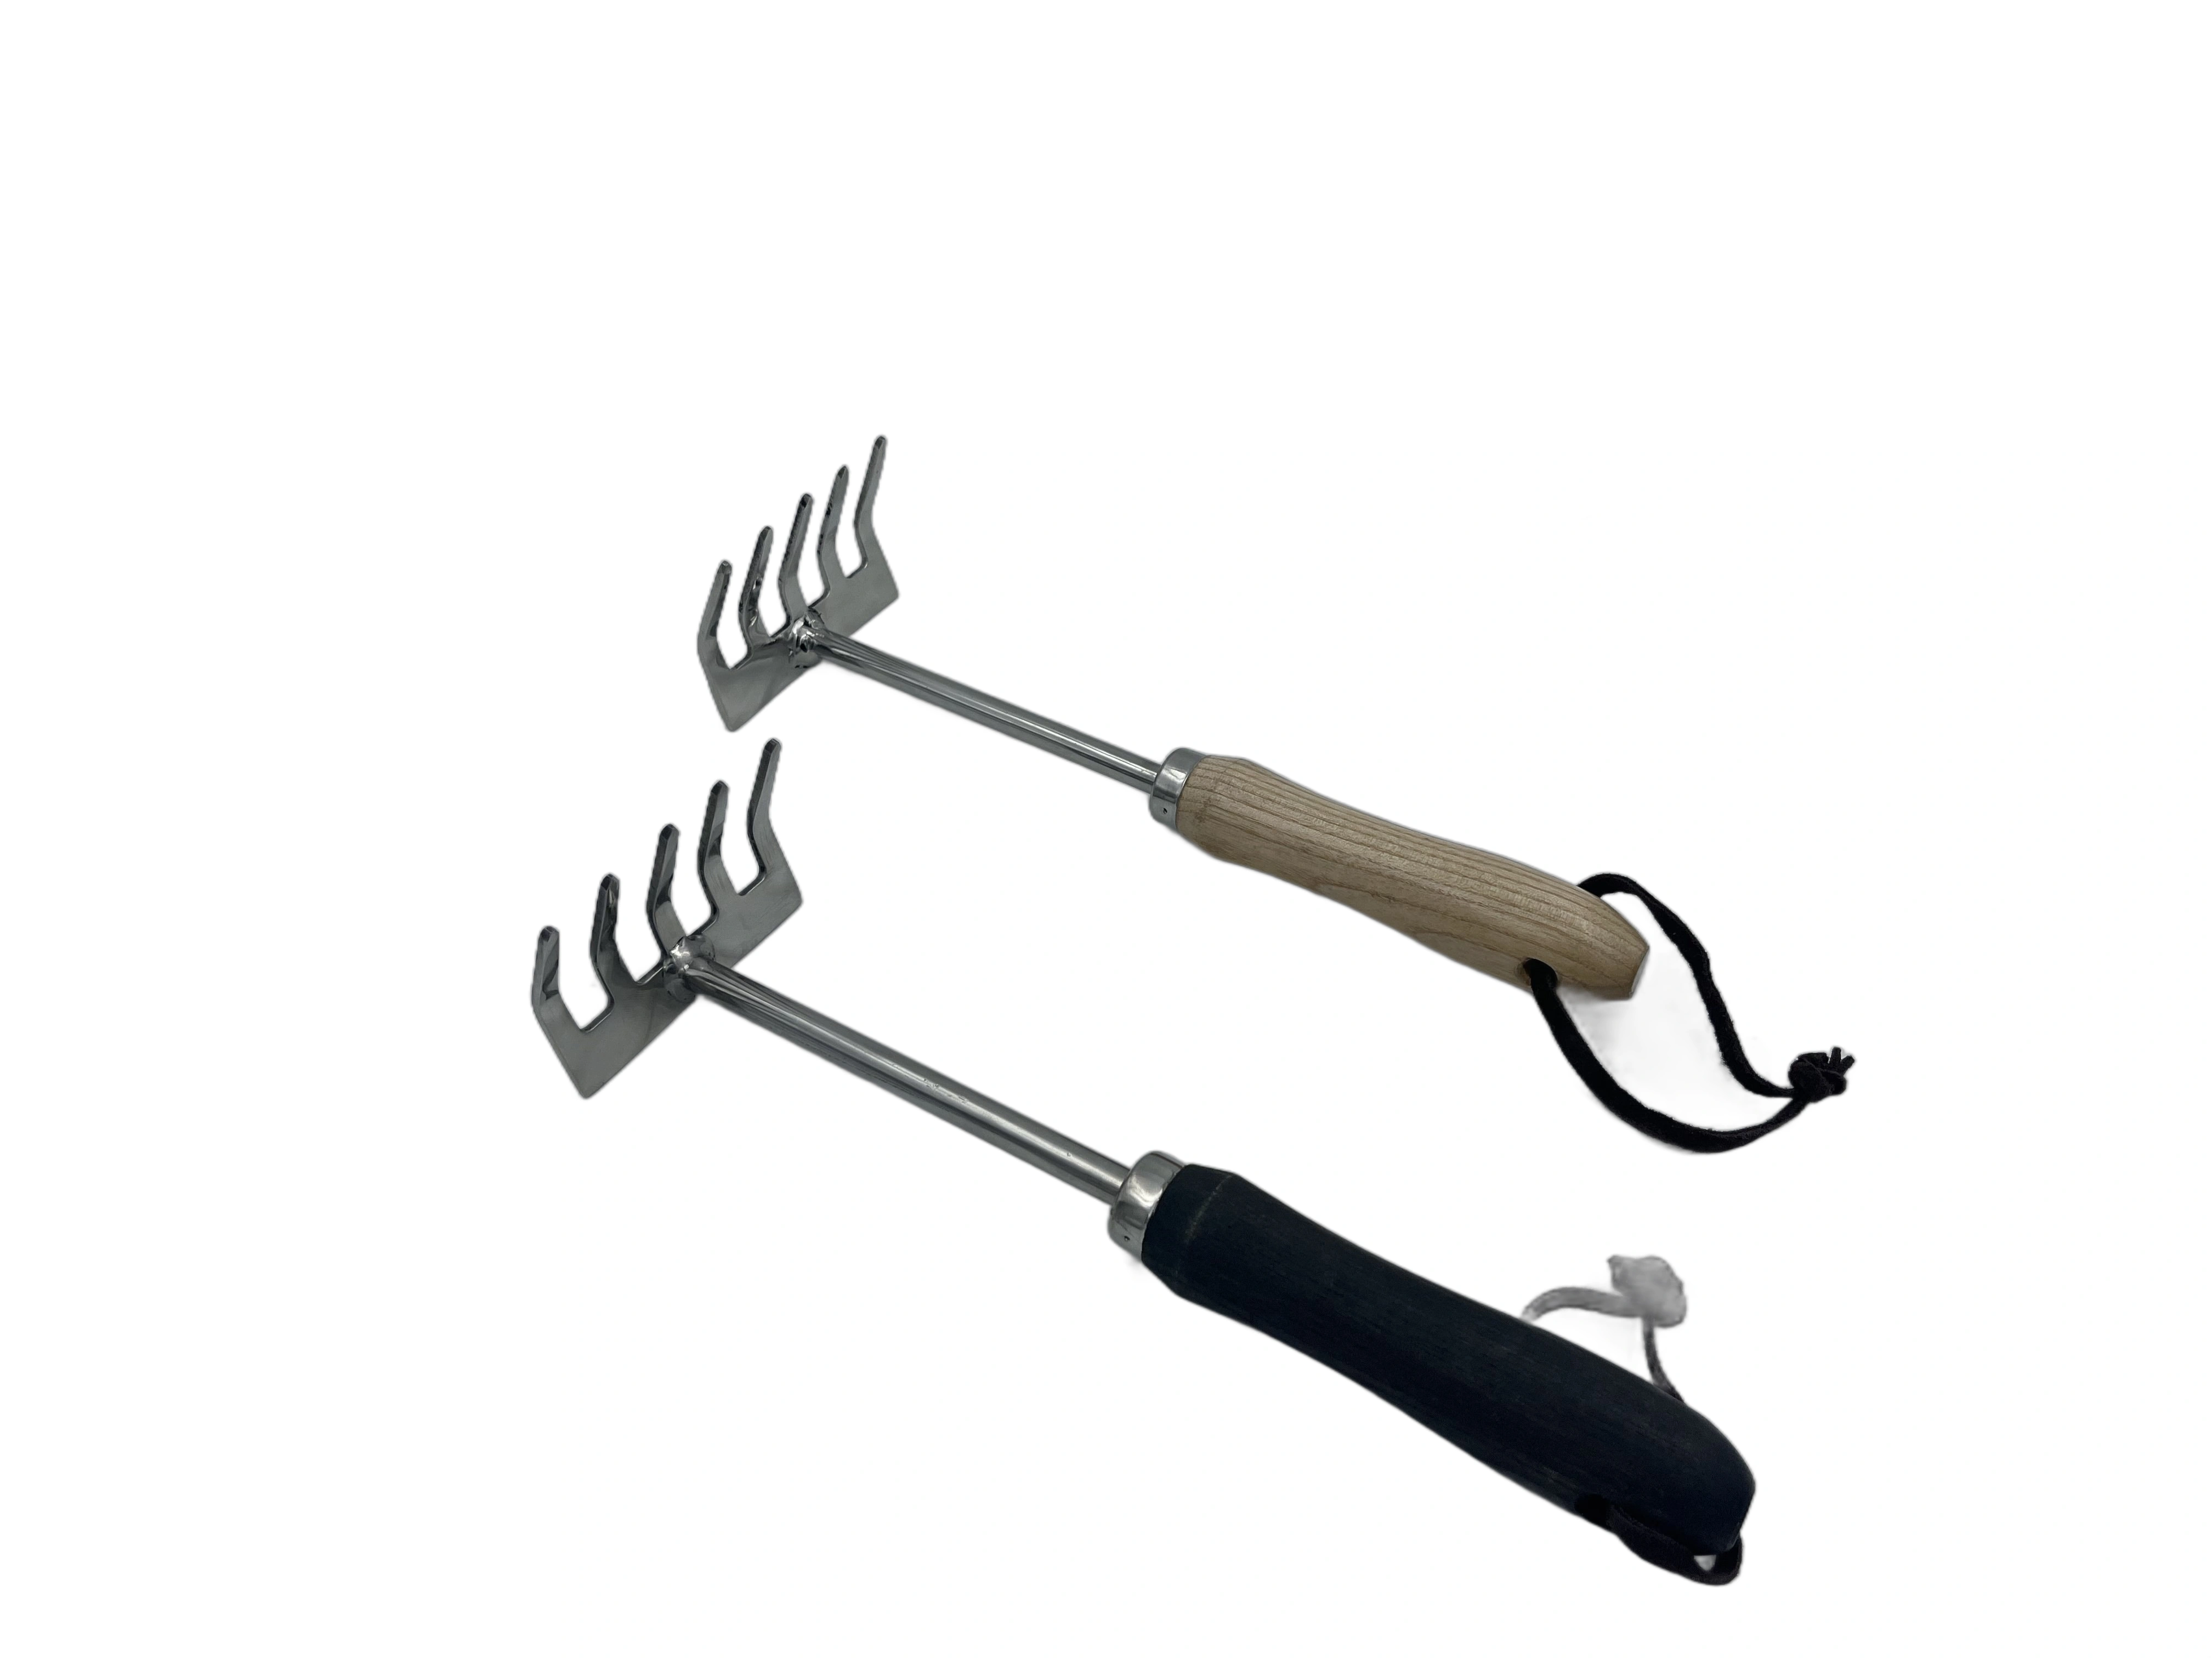 Stainless steel 5T Rake with Ash wood handle-12547532